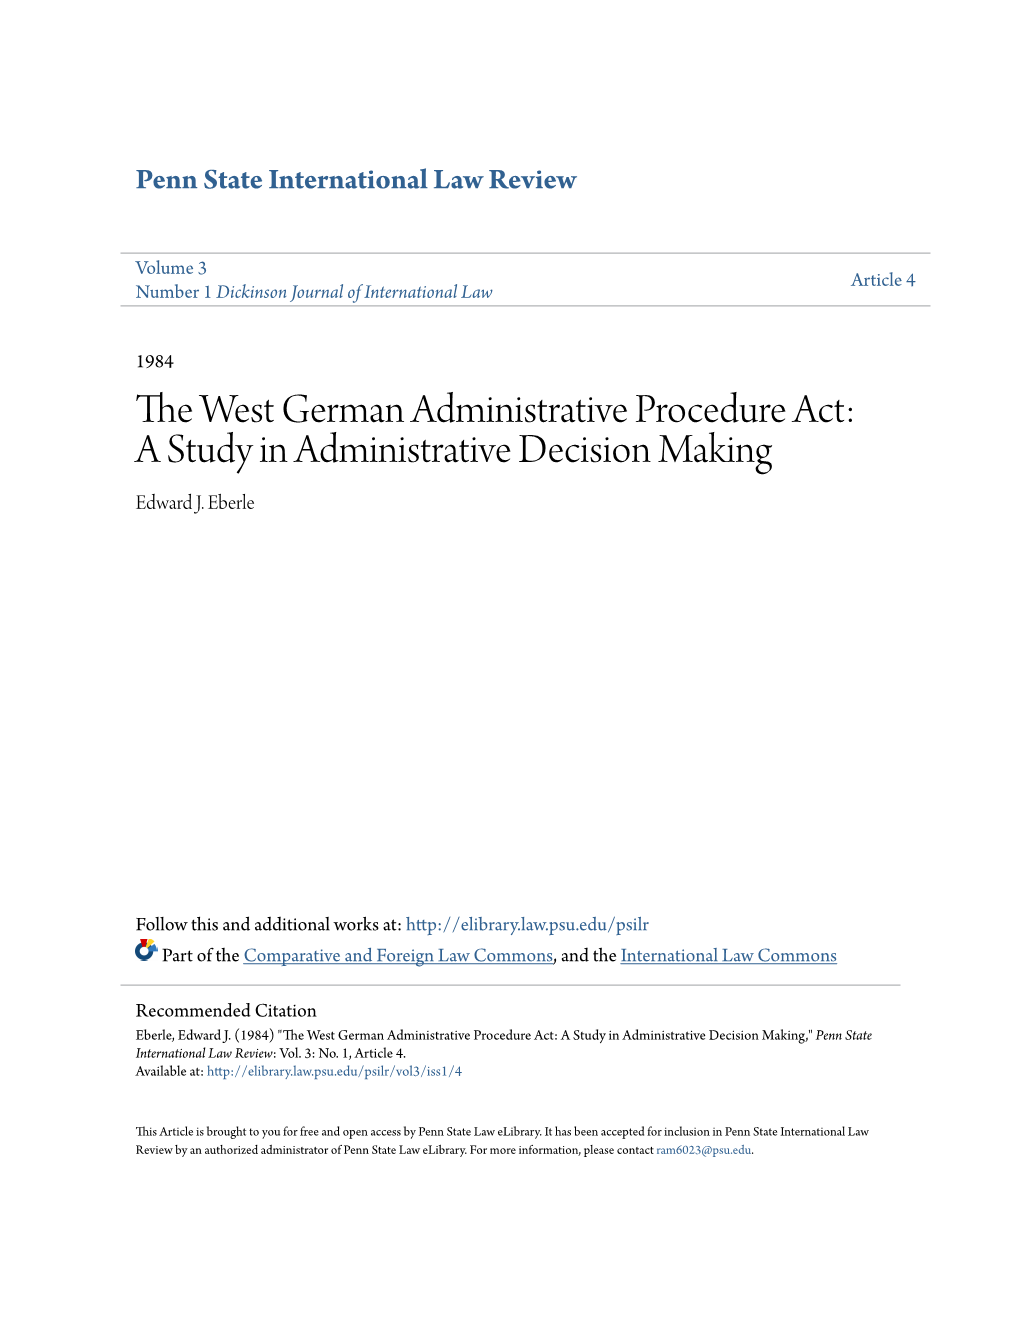 The West German Administrative Procedure Act: a Study in Administrative Decision Making*